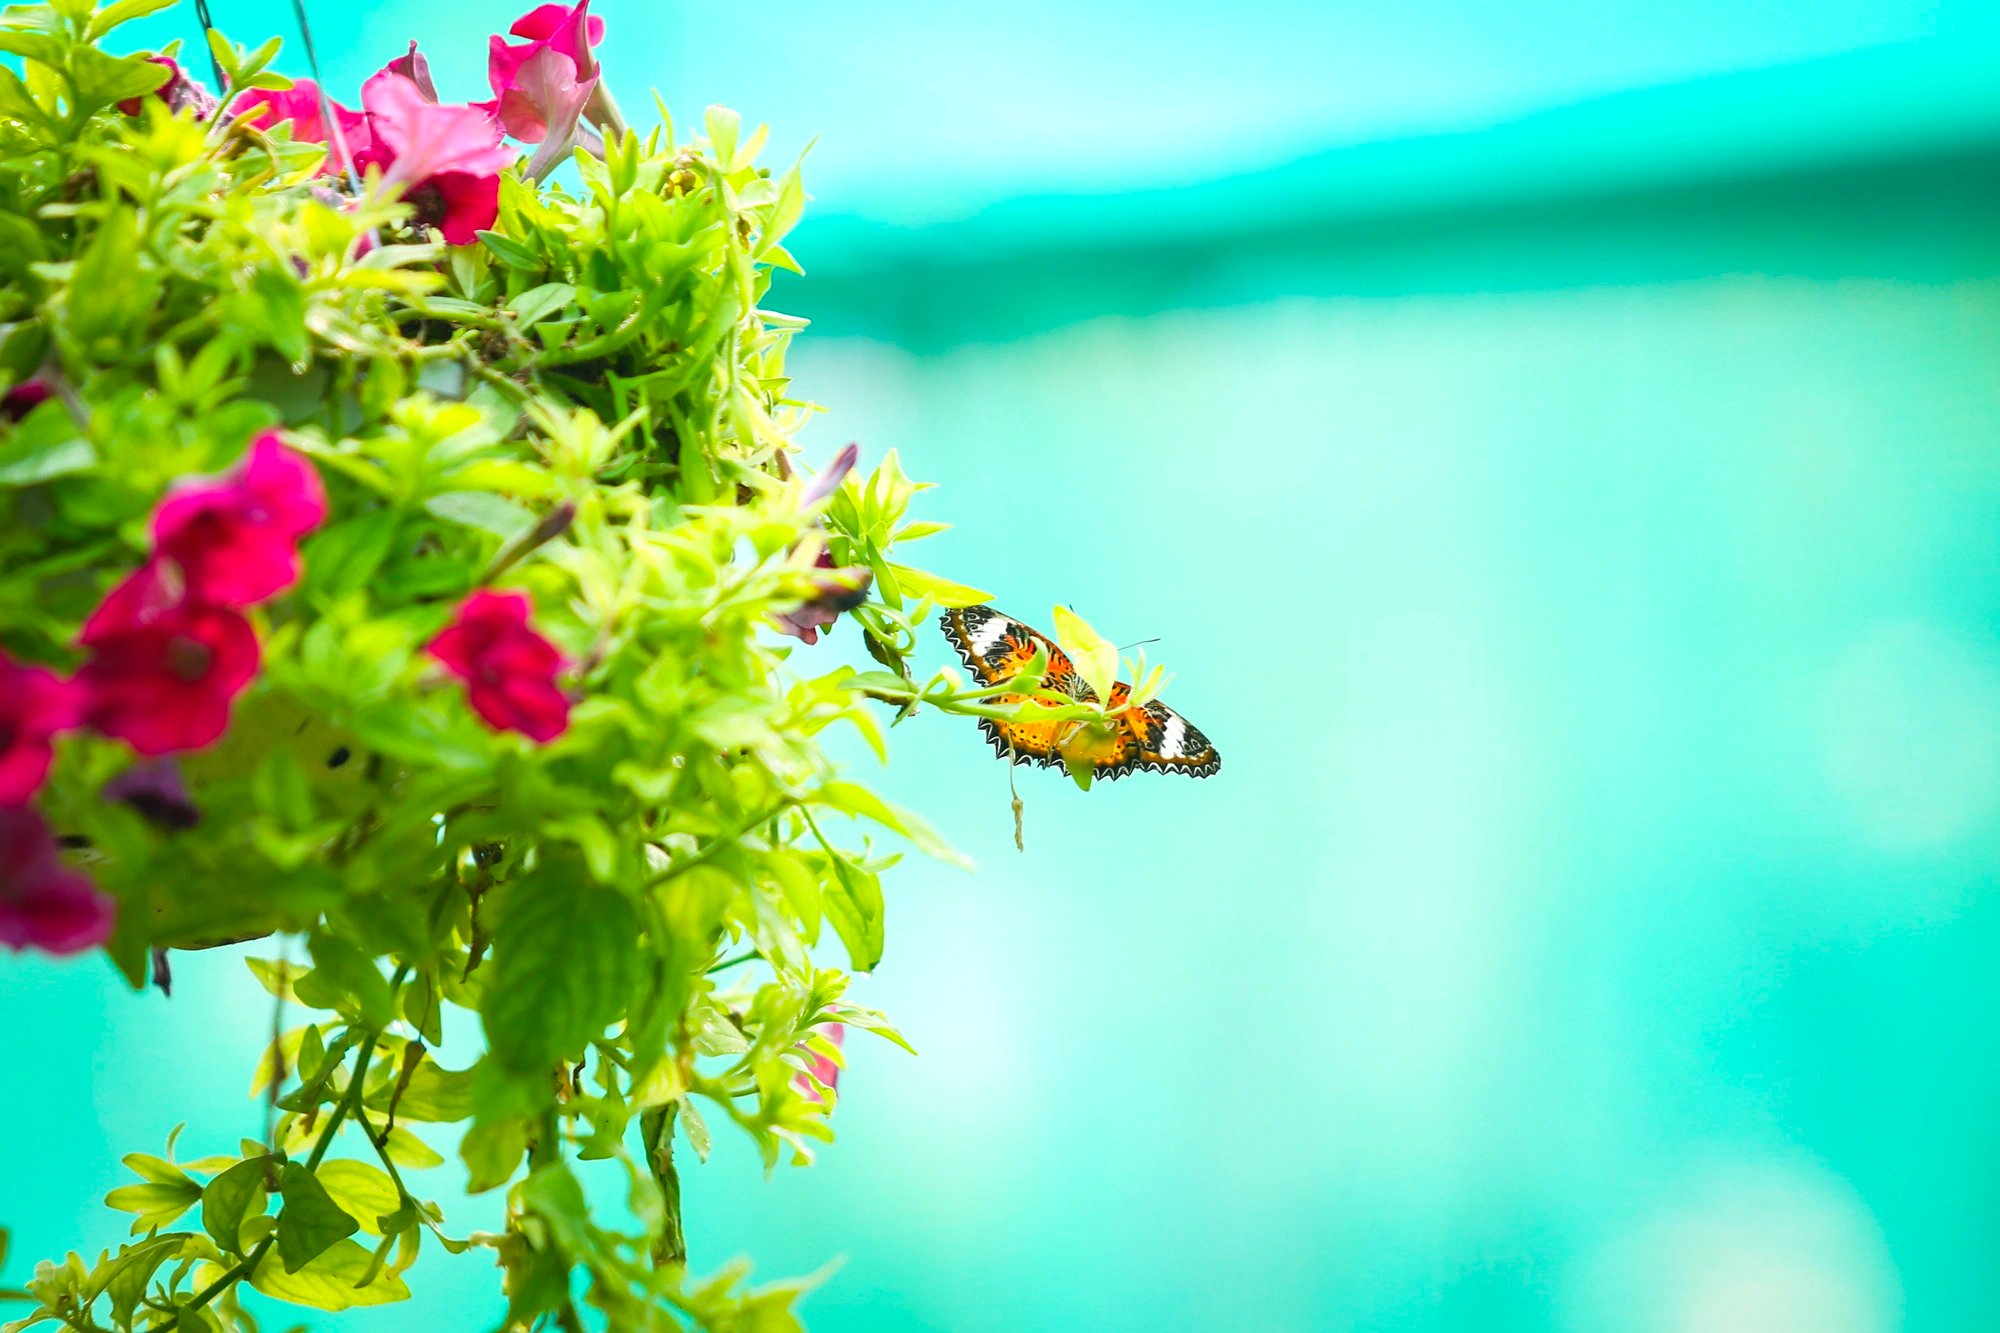 Saigon Zoo and Botanical Gardens reopens 500sqm butterfly garden for Tet